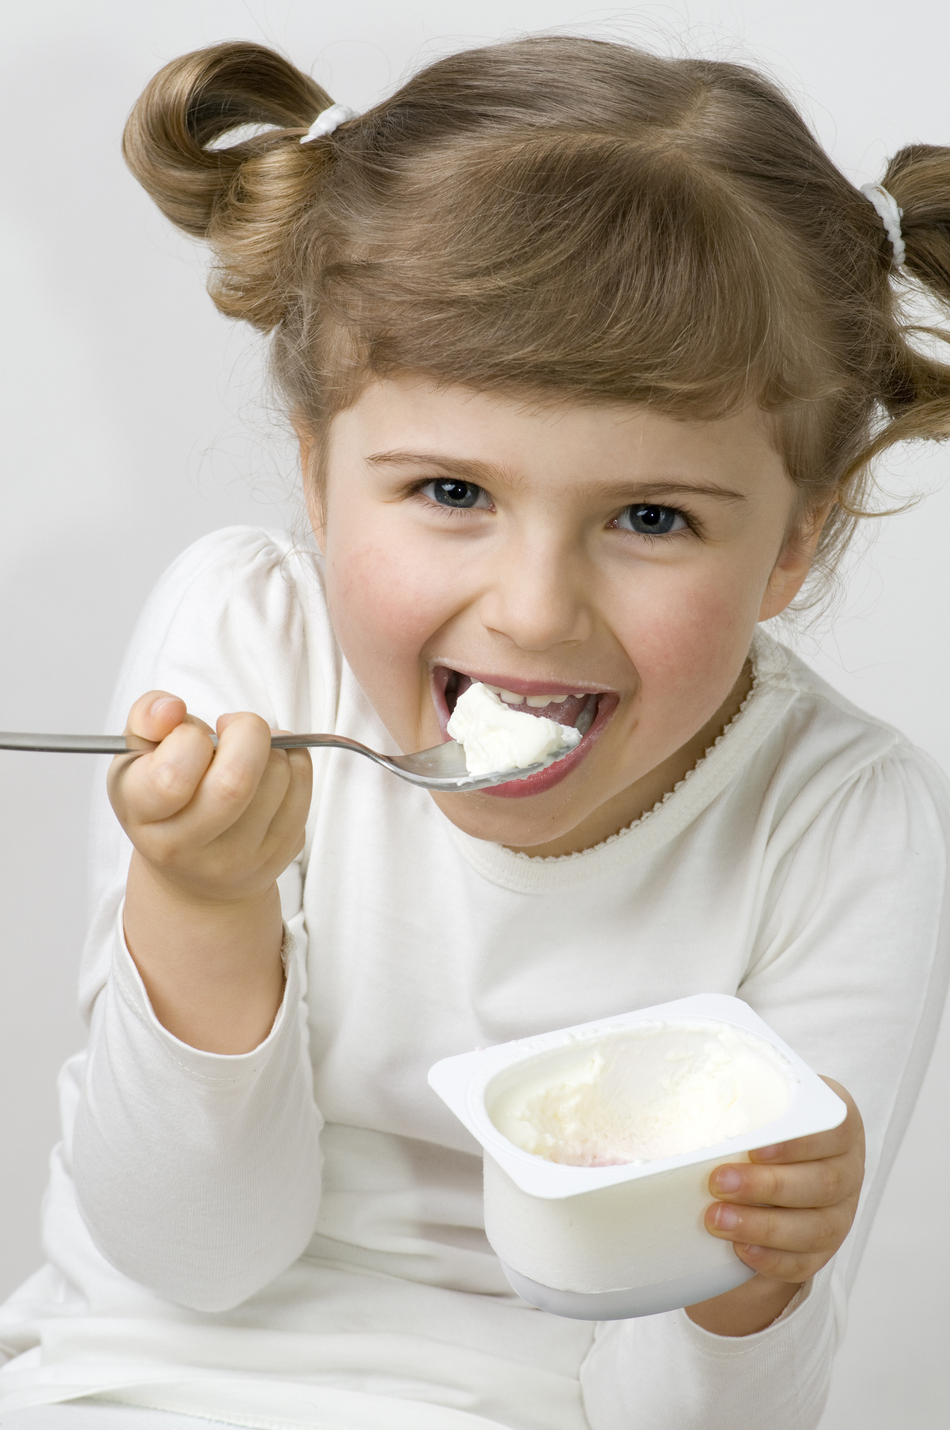 Hidden Sugars Could Contribute to Childhood Obesity